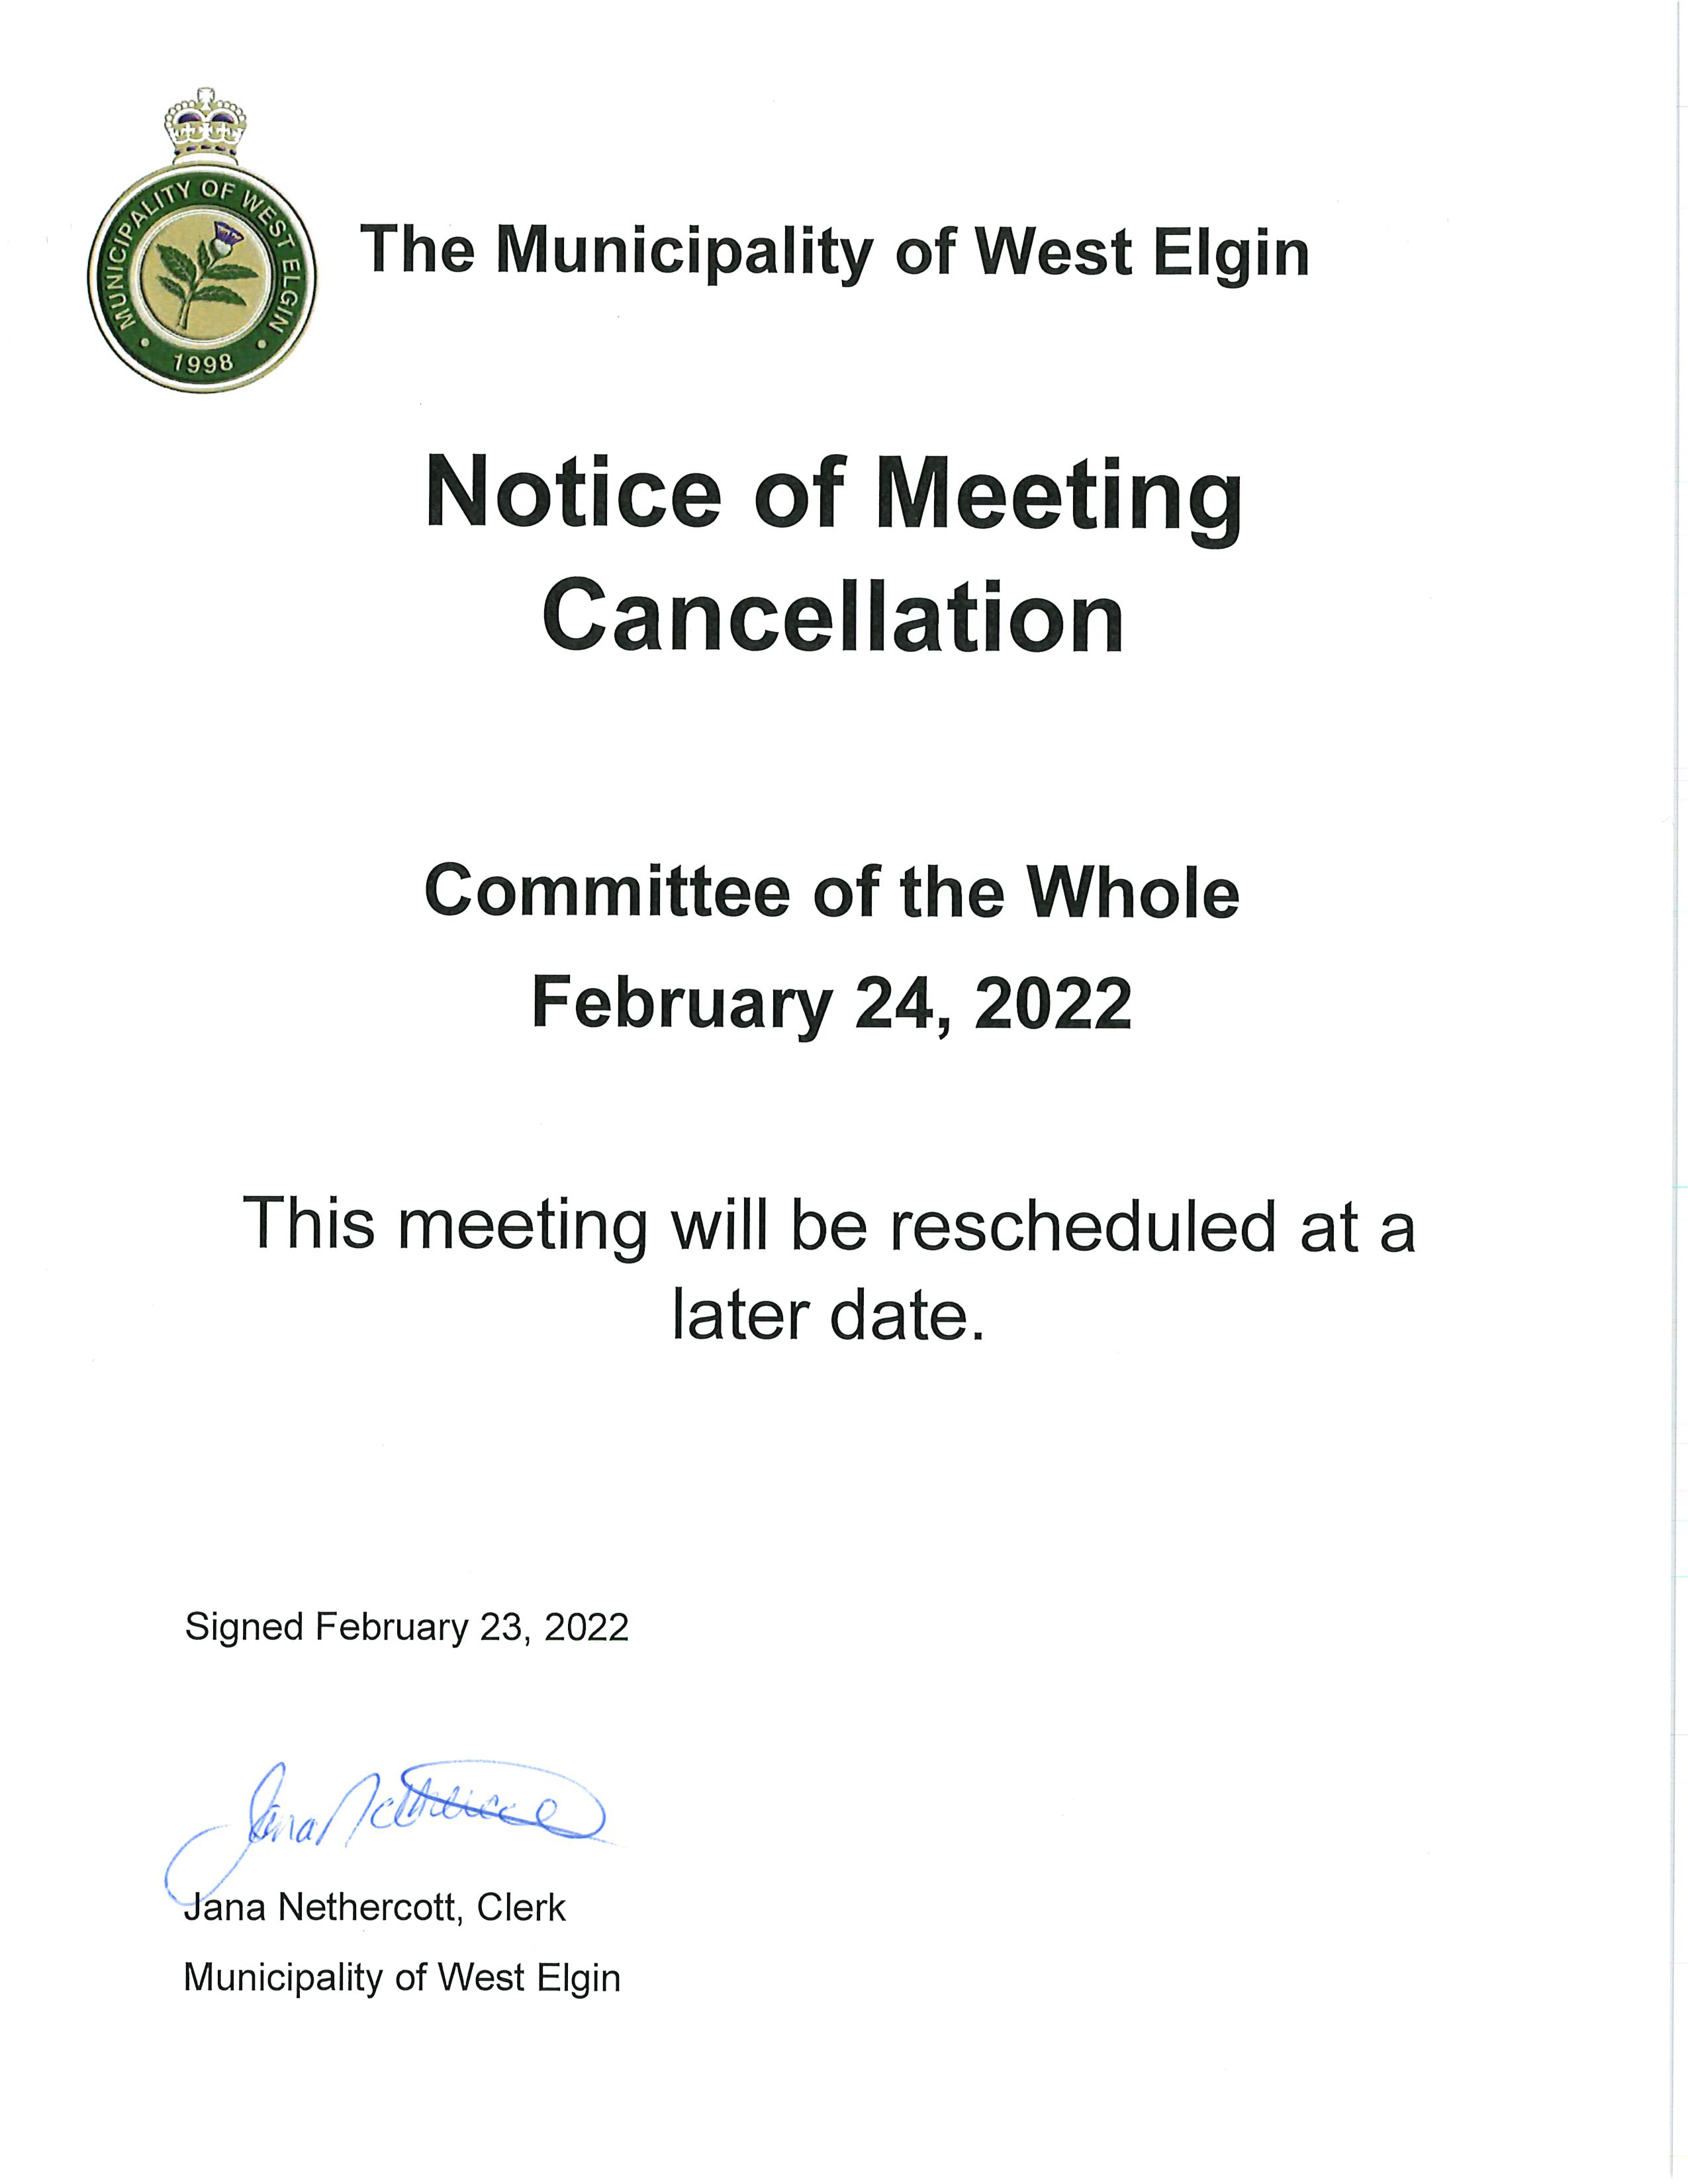 Notice of Meeting Cancellation